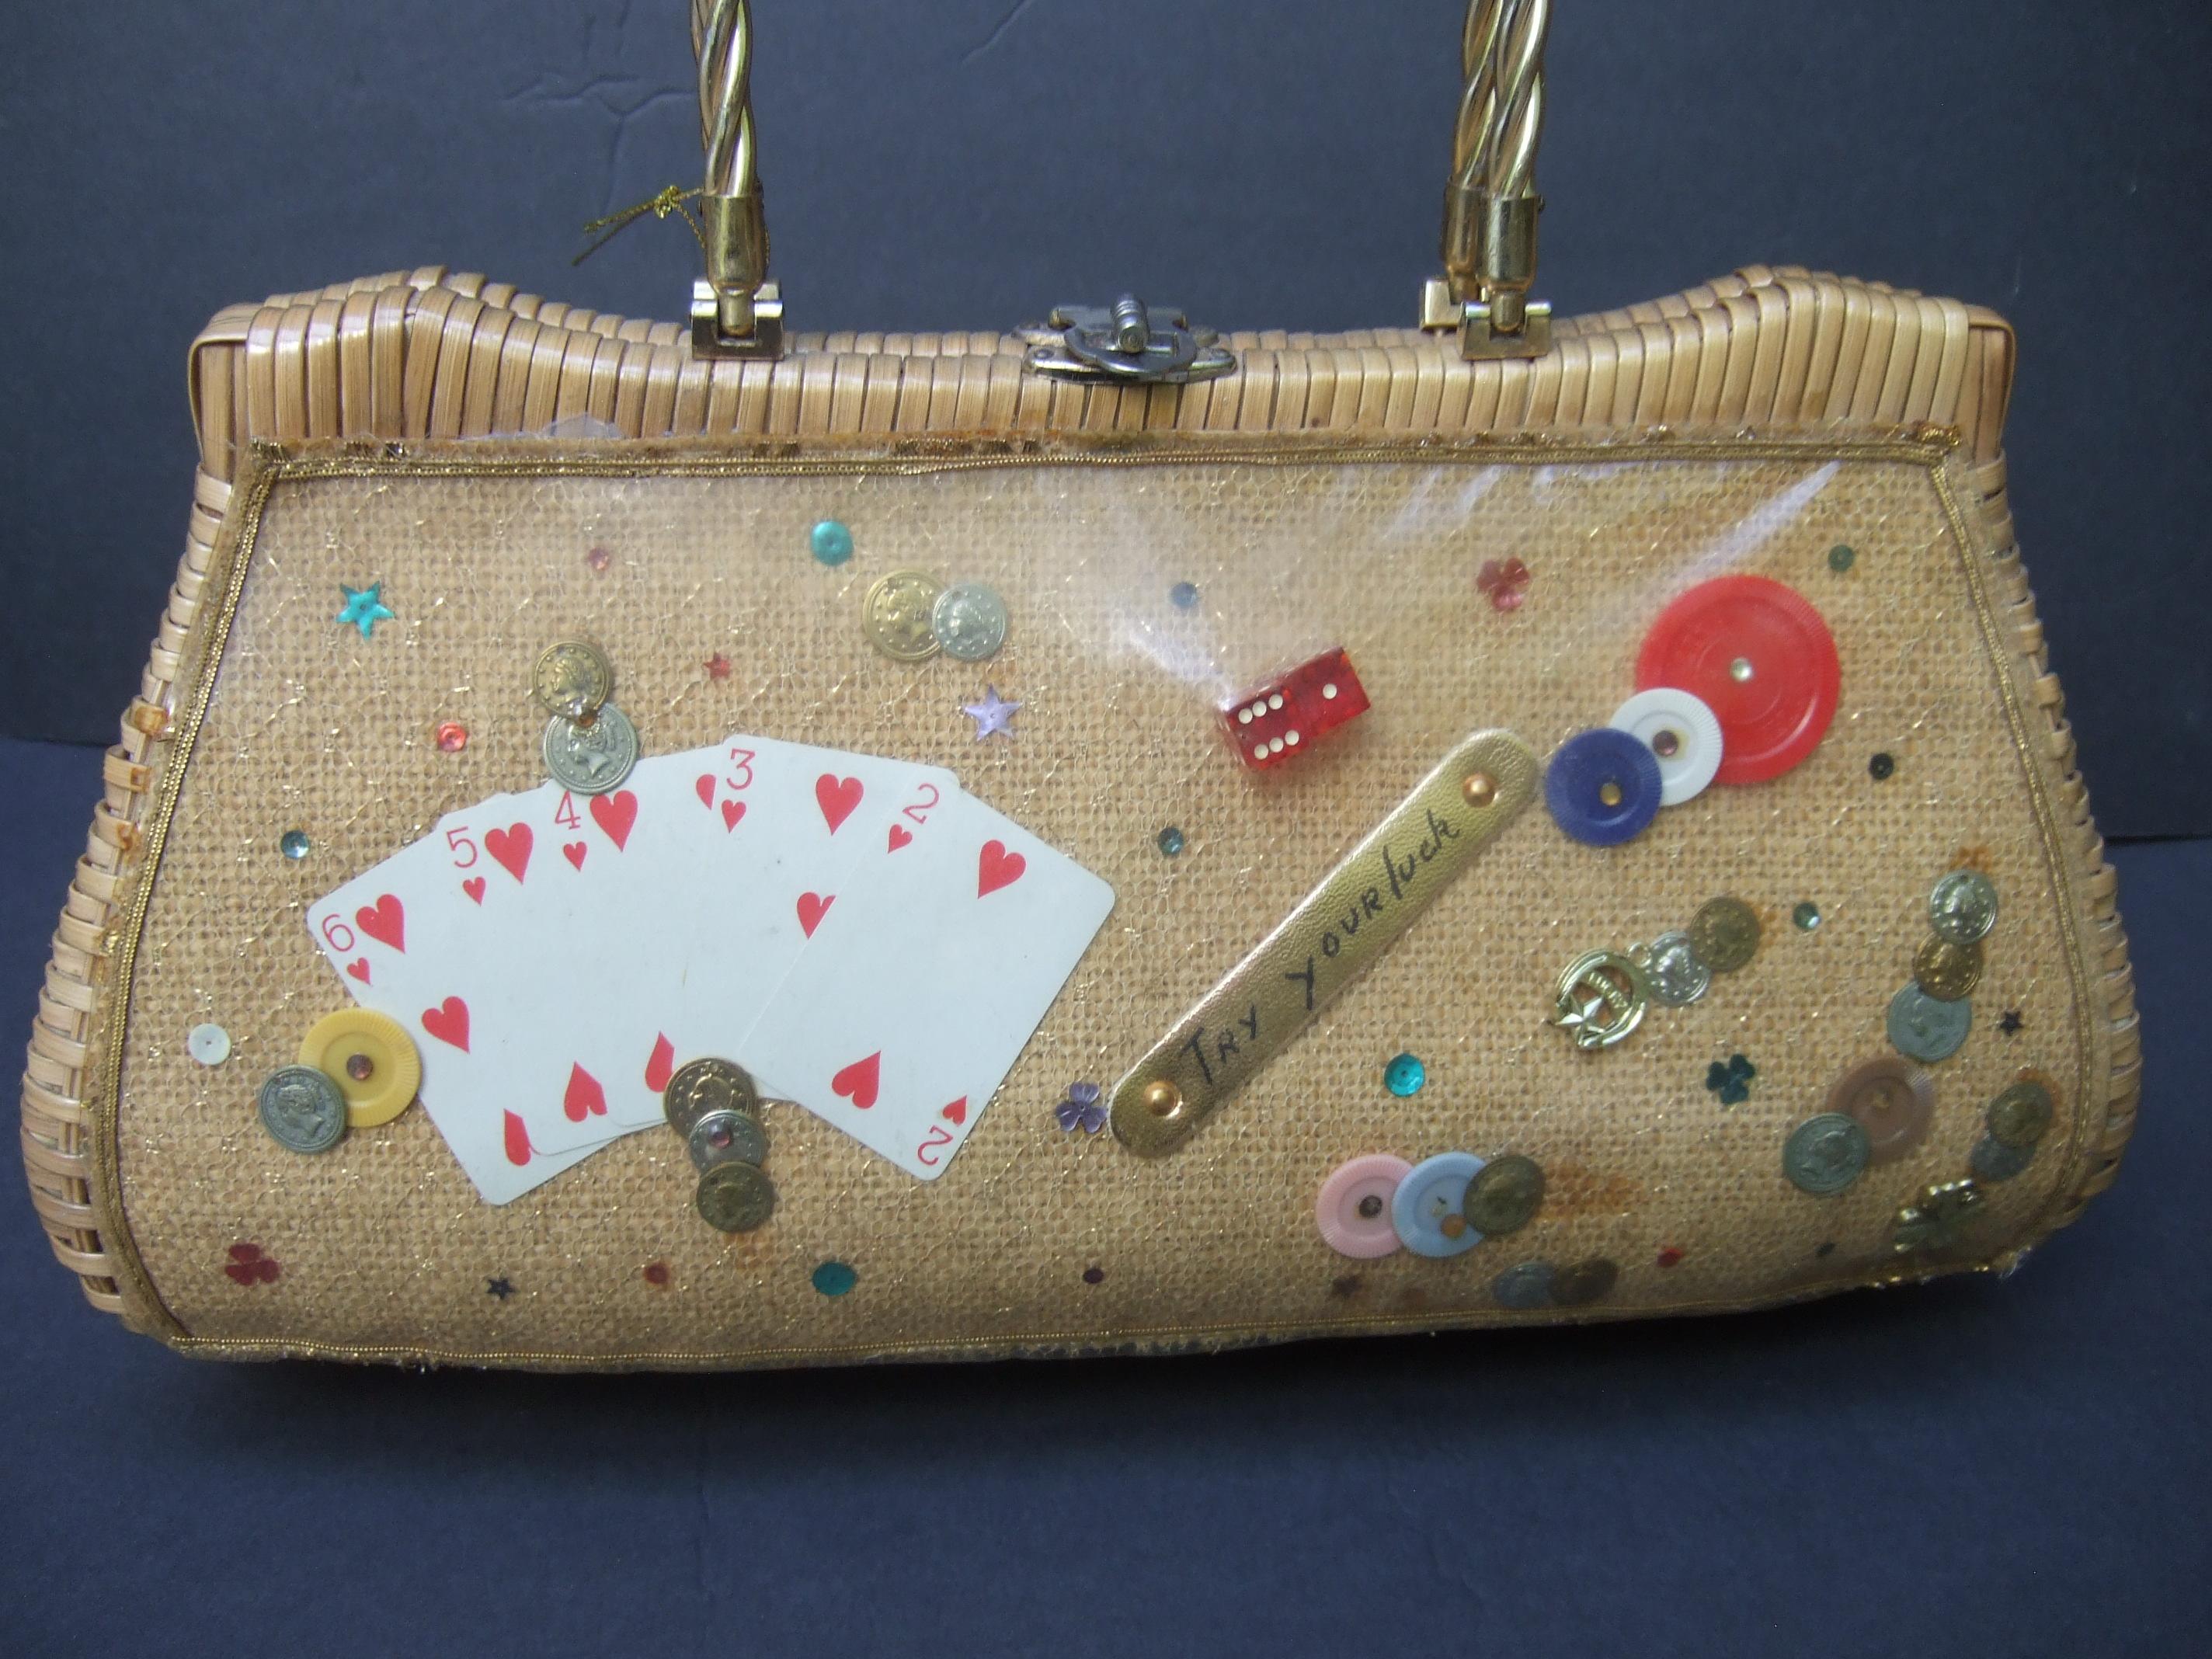 Whimsical Gambling Themed Woven Wicker Retro Handbag c 1960s In Good Condition For Sale In University City, MO